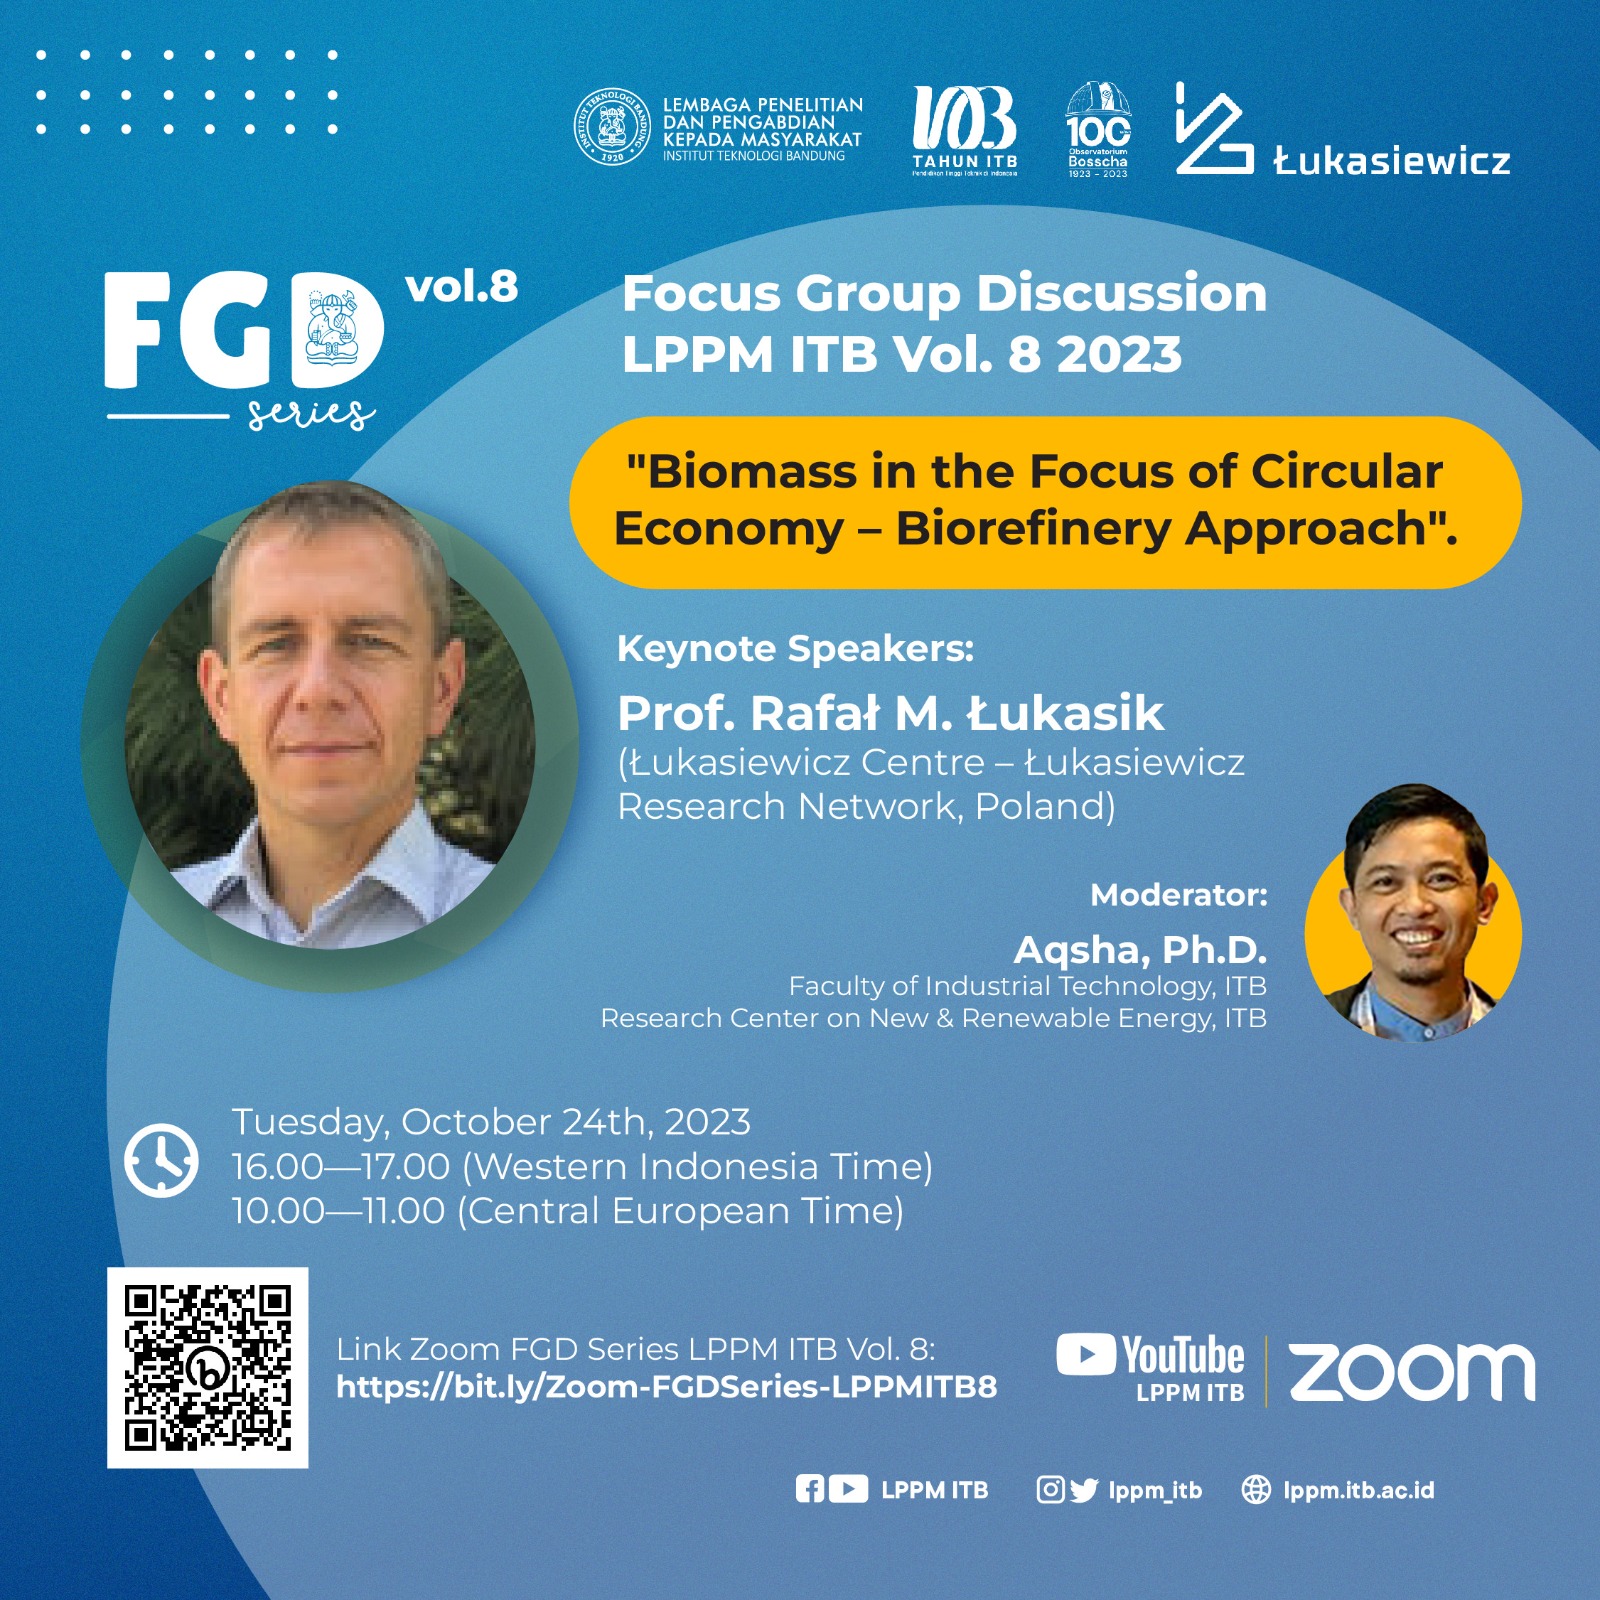 FGD Series LPPM ITB Vol. 8 “Biomass in the Focus of Circular Economy – Biorefinery Approach”